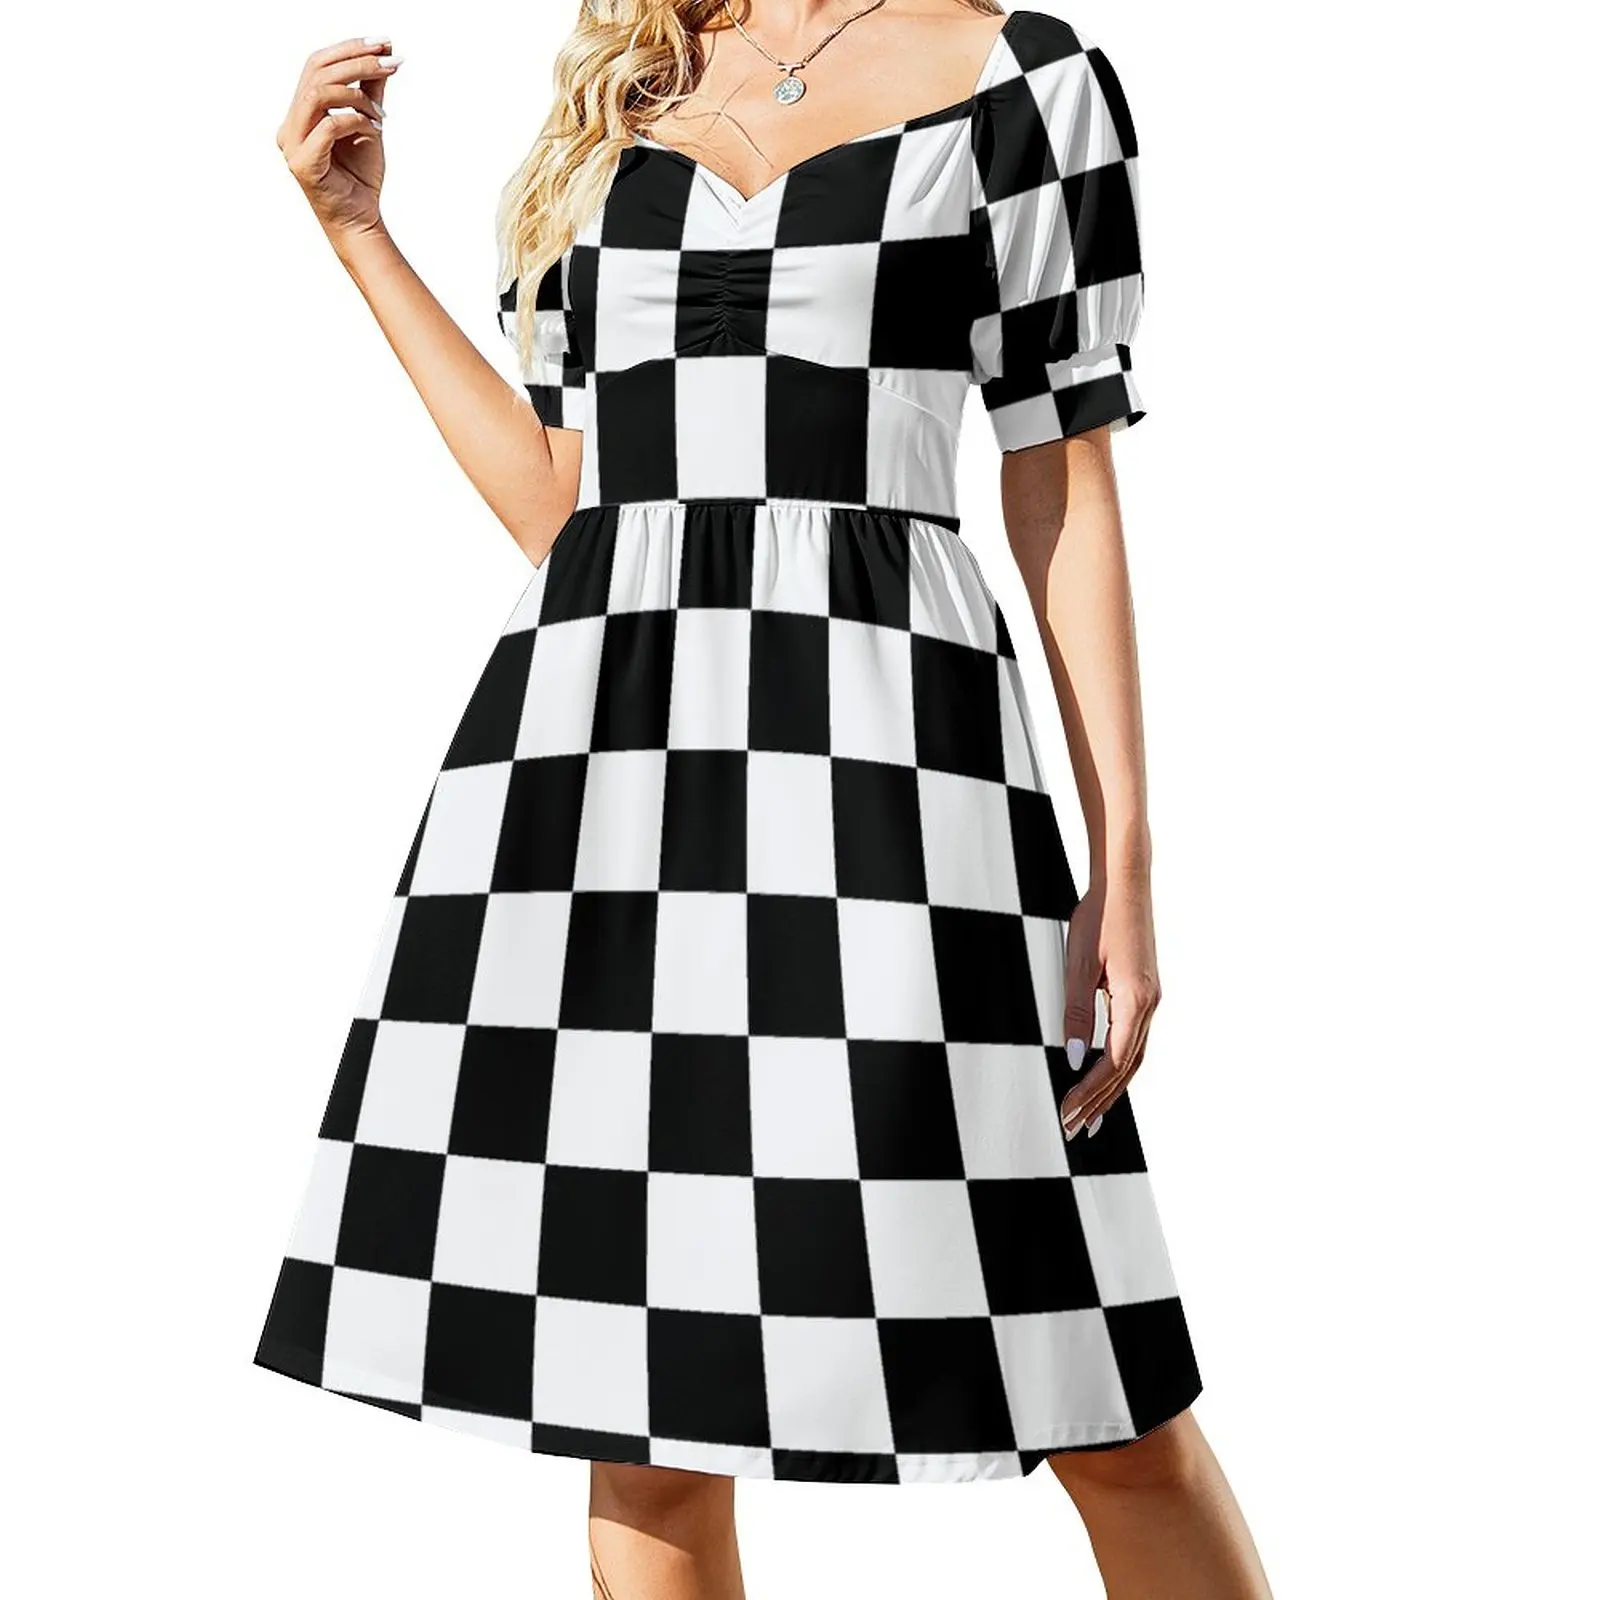 

Black and White Squares - Checkered Flag Dress Party dresses for women Women's summer long dress